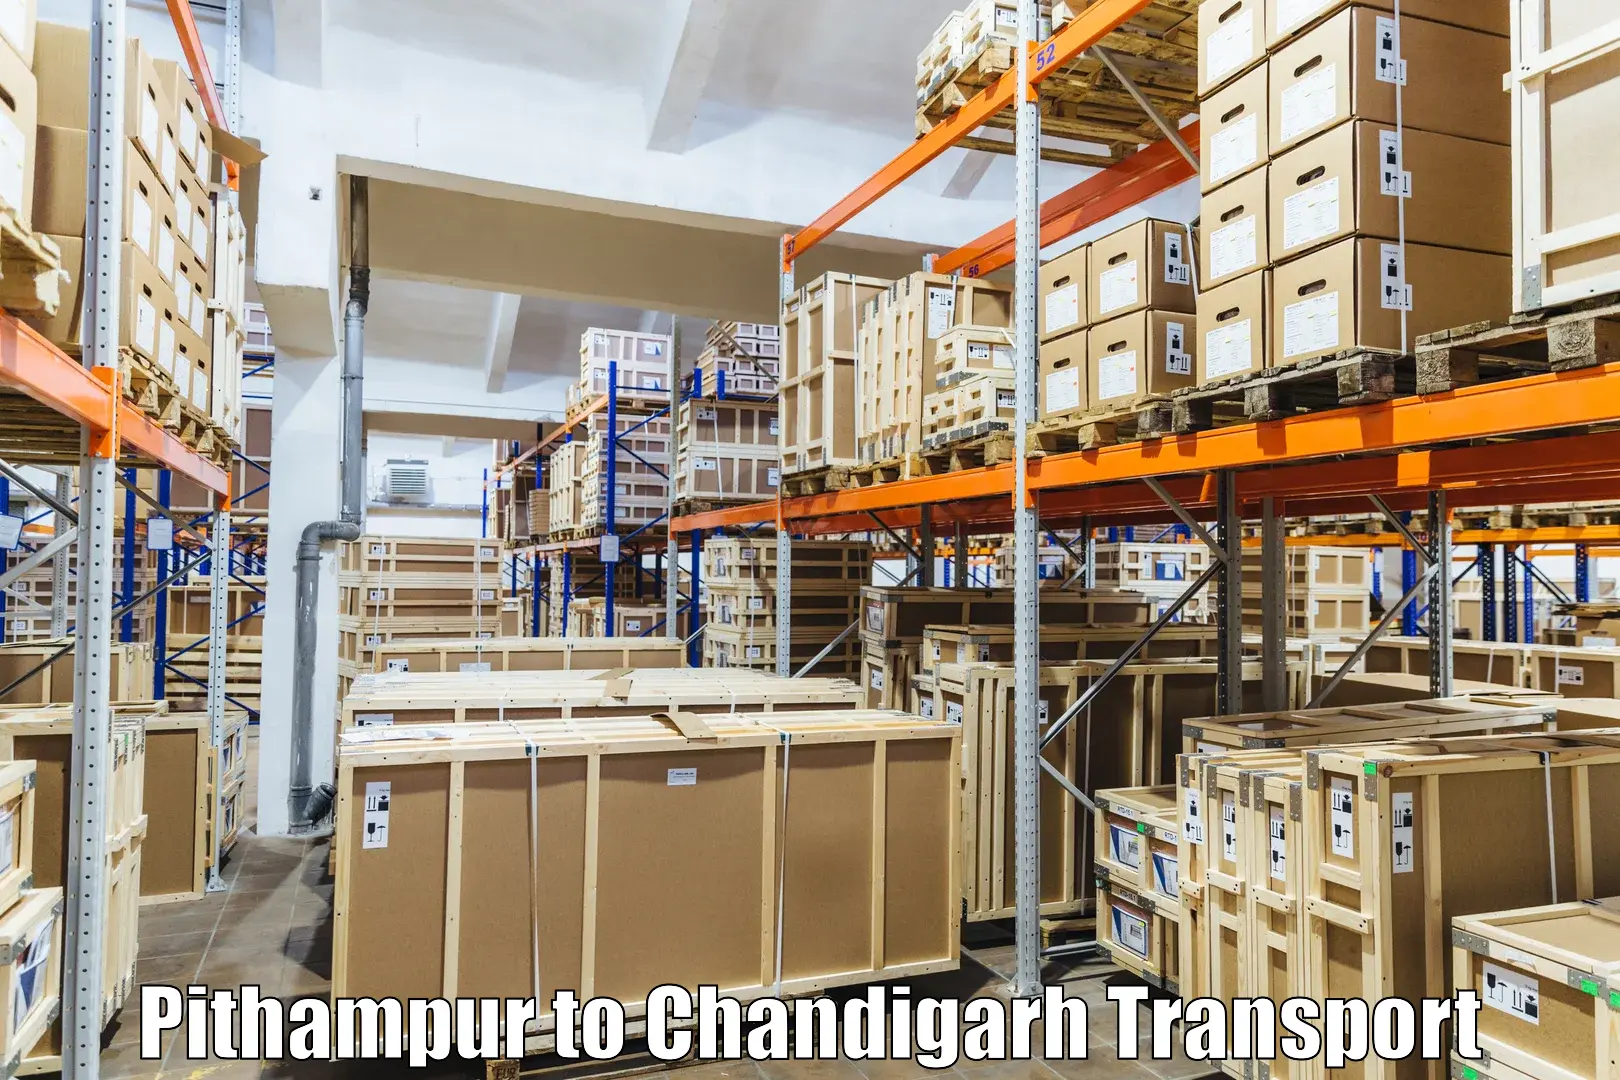 Shipping partner Pithampur to Chandigarh